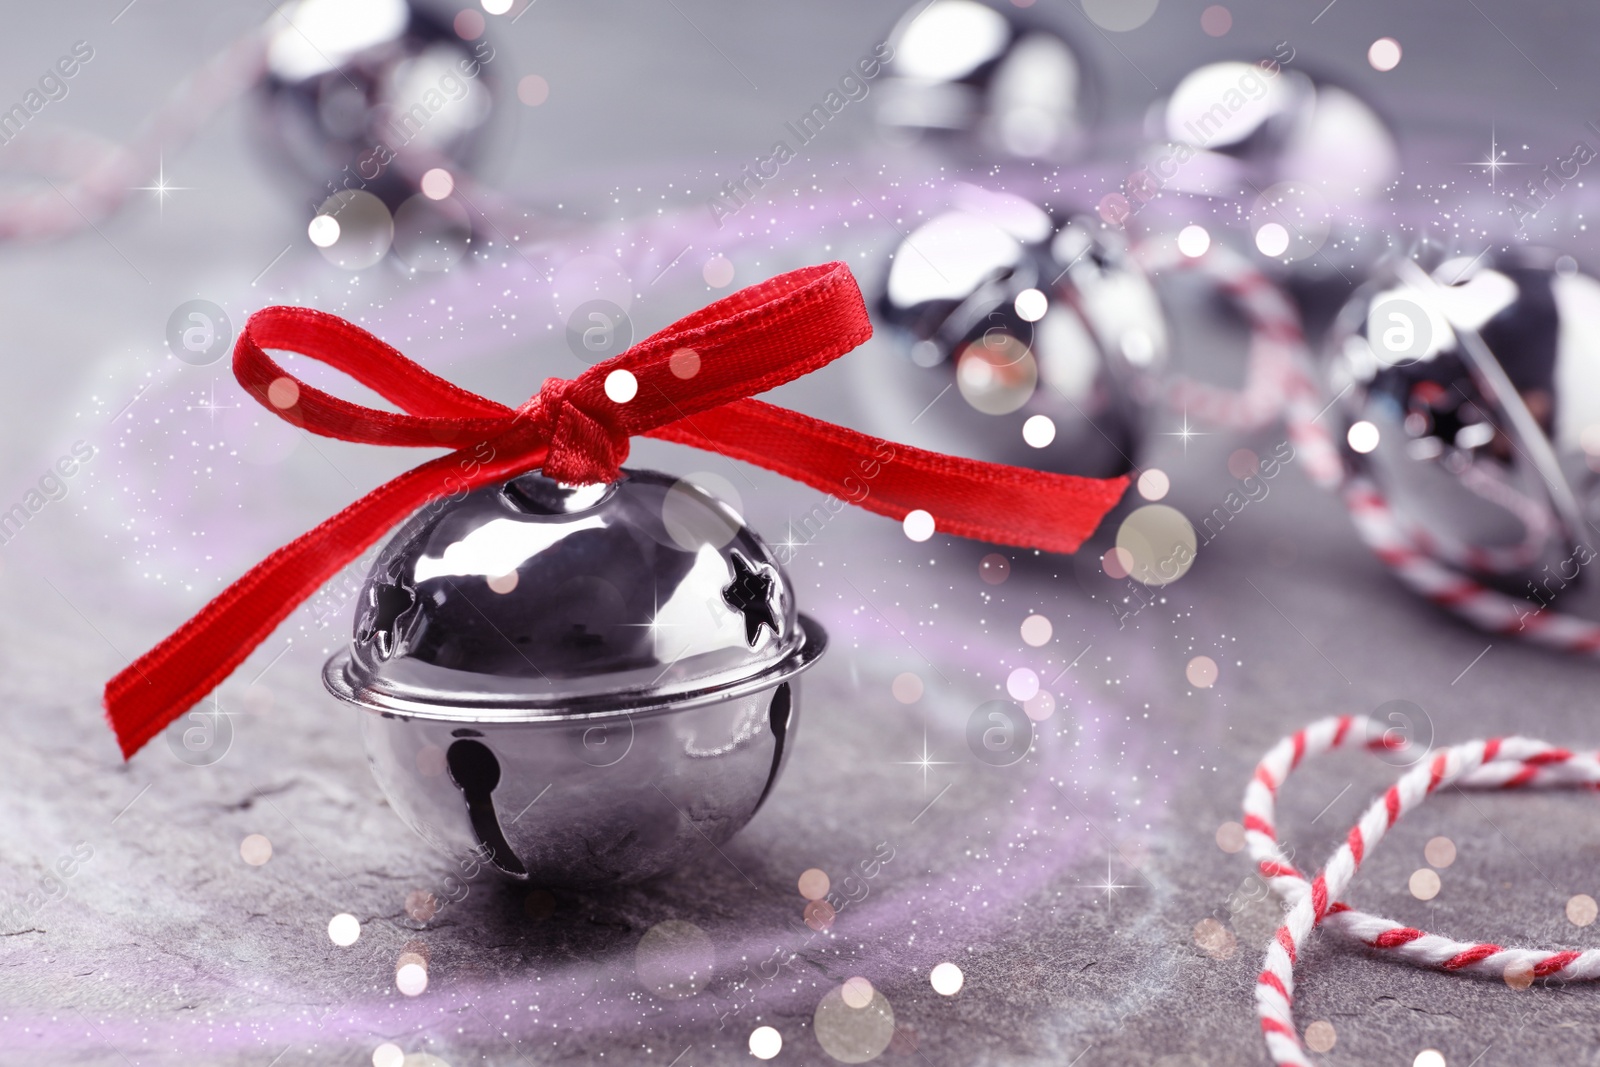 Image of Shiny silver sleigh bell on grey stone table, closeup